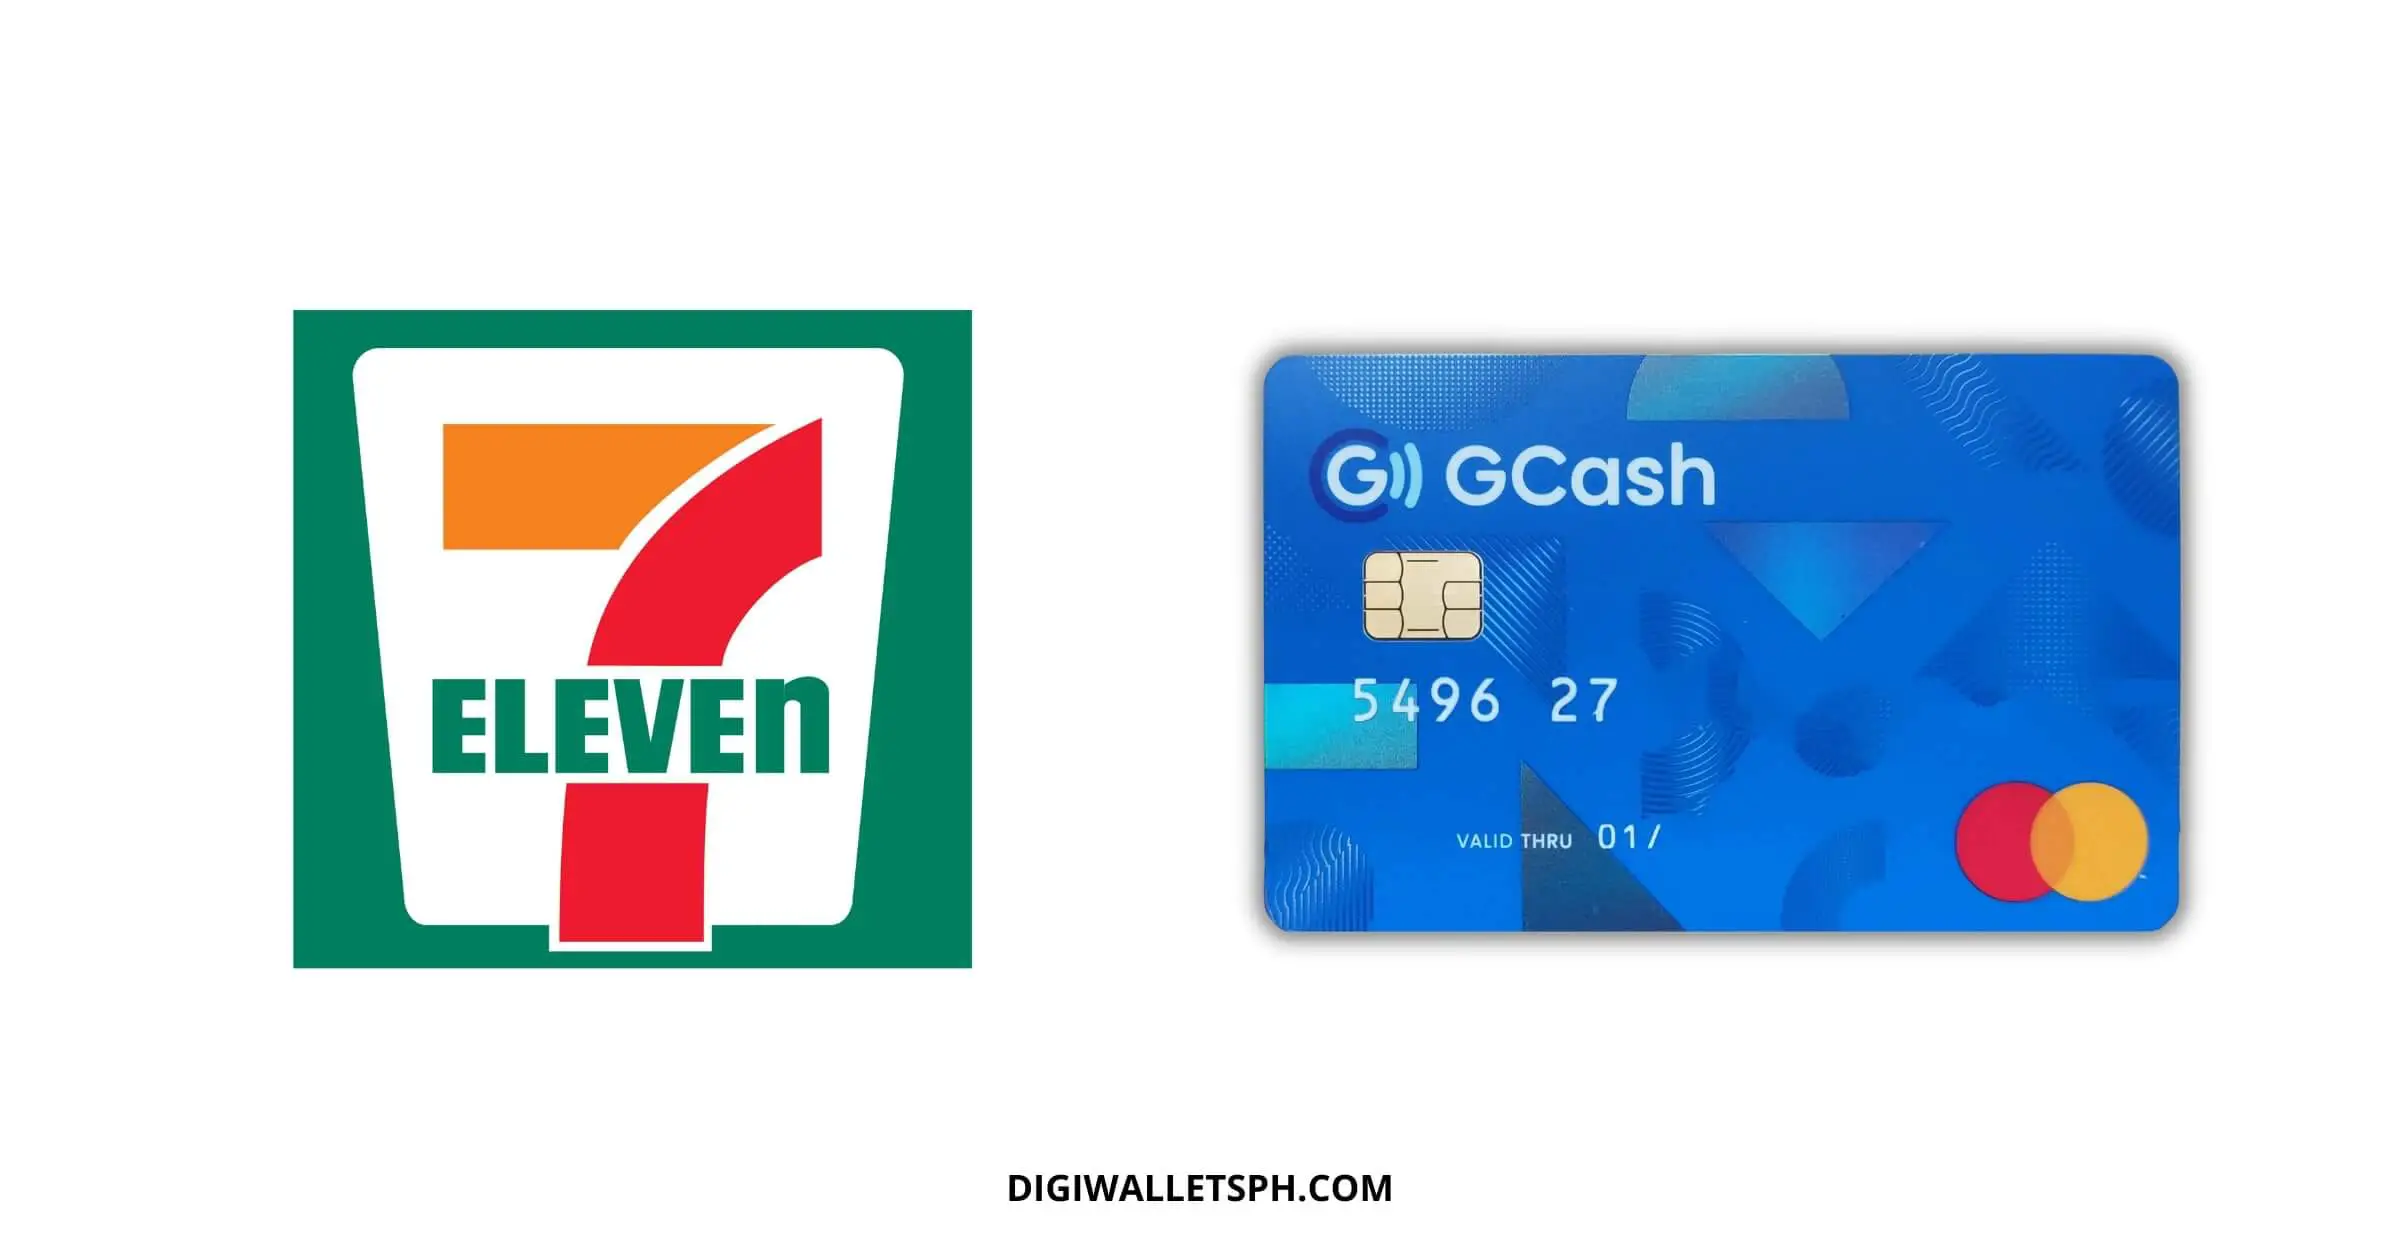 How to get GCash mastercard in 7/11